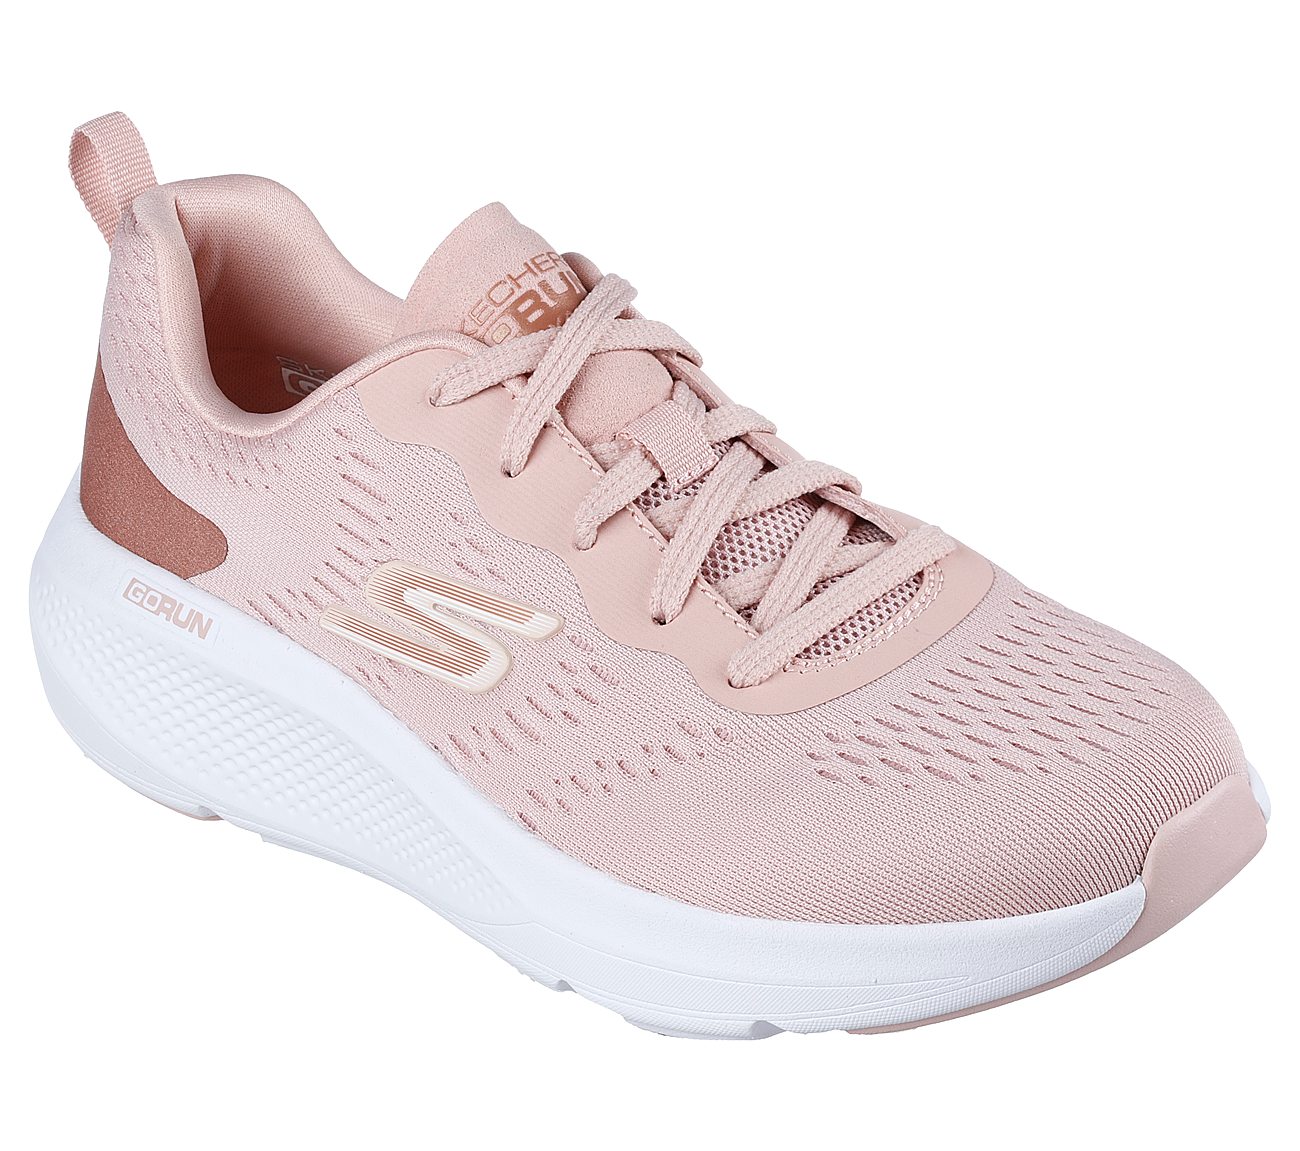 Skechers Mauve Go Run Elevate Running Shoes For Women - Style ID: 128319